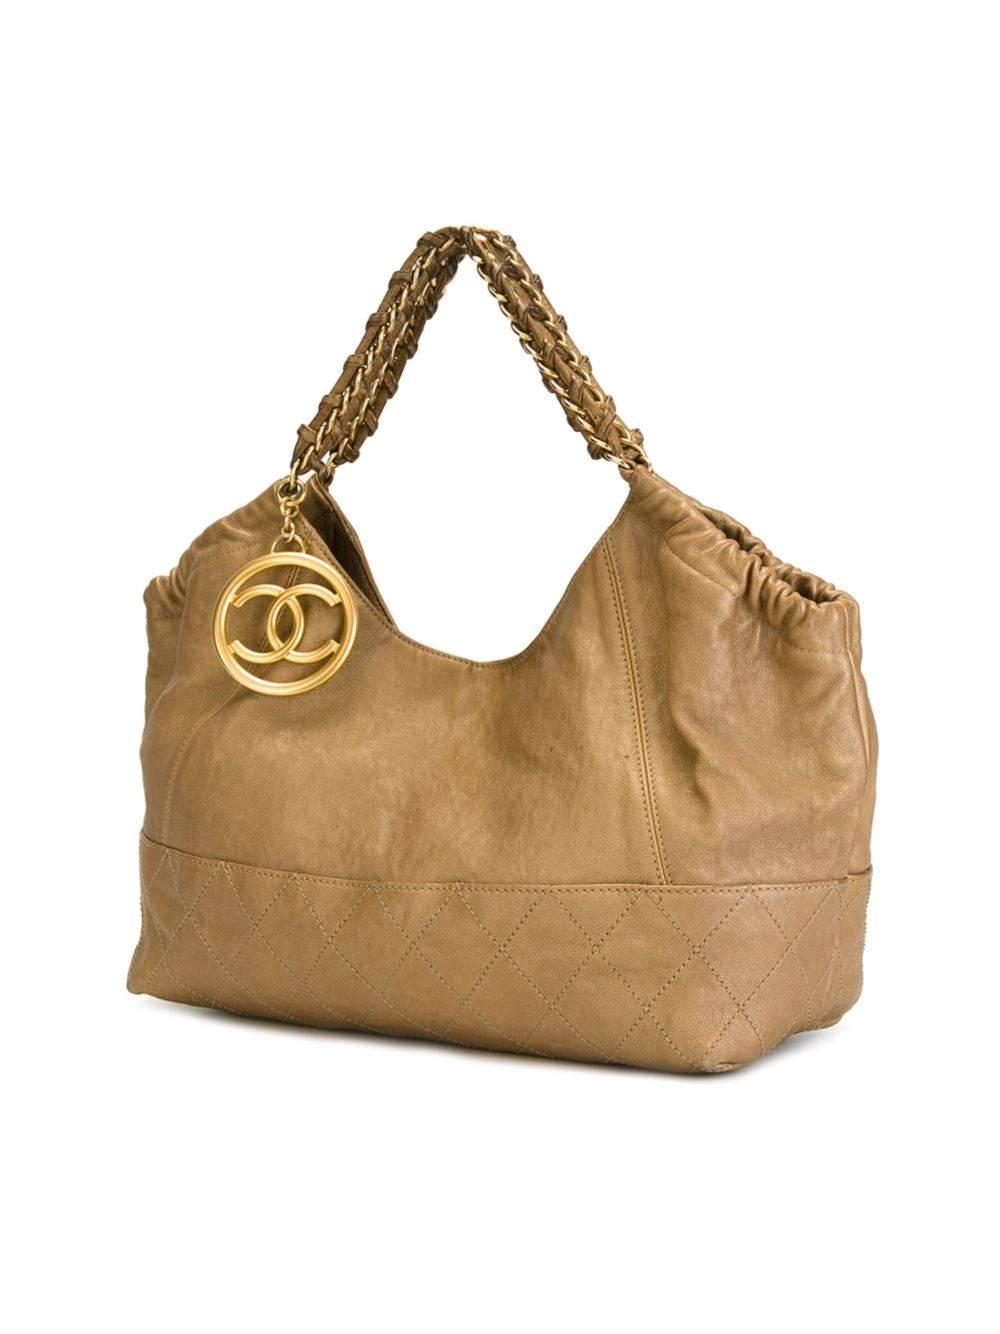 Gold-tone leather slouchy tote featuring braided handles, a gold-tone logo plaque, stitching details, an internal zipped pocket and an internal logo patch.

Colour: Gold-tone

Material: Leather 100% / Metal 100%

Measurements: W: 46cm, H: